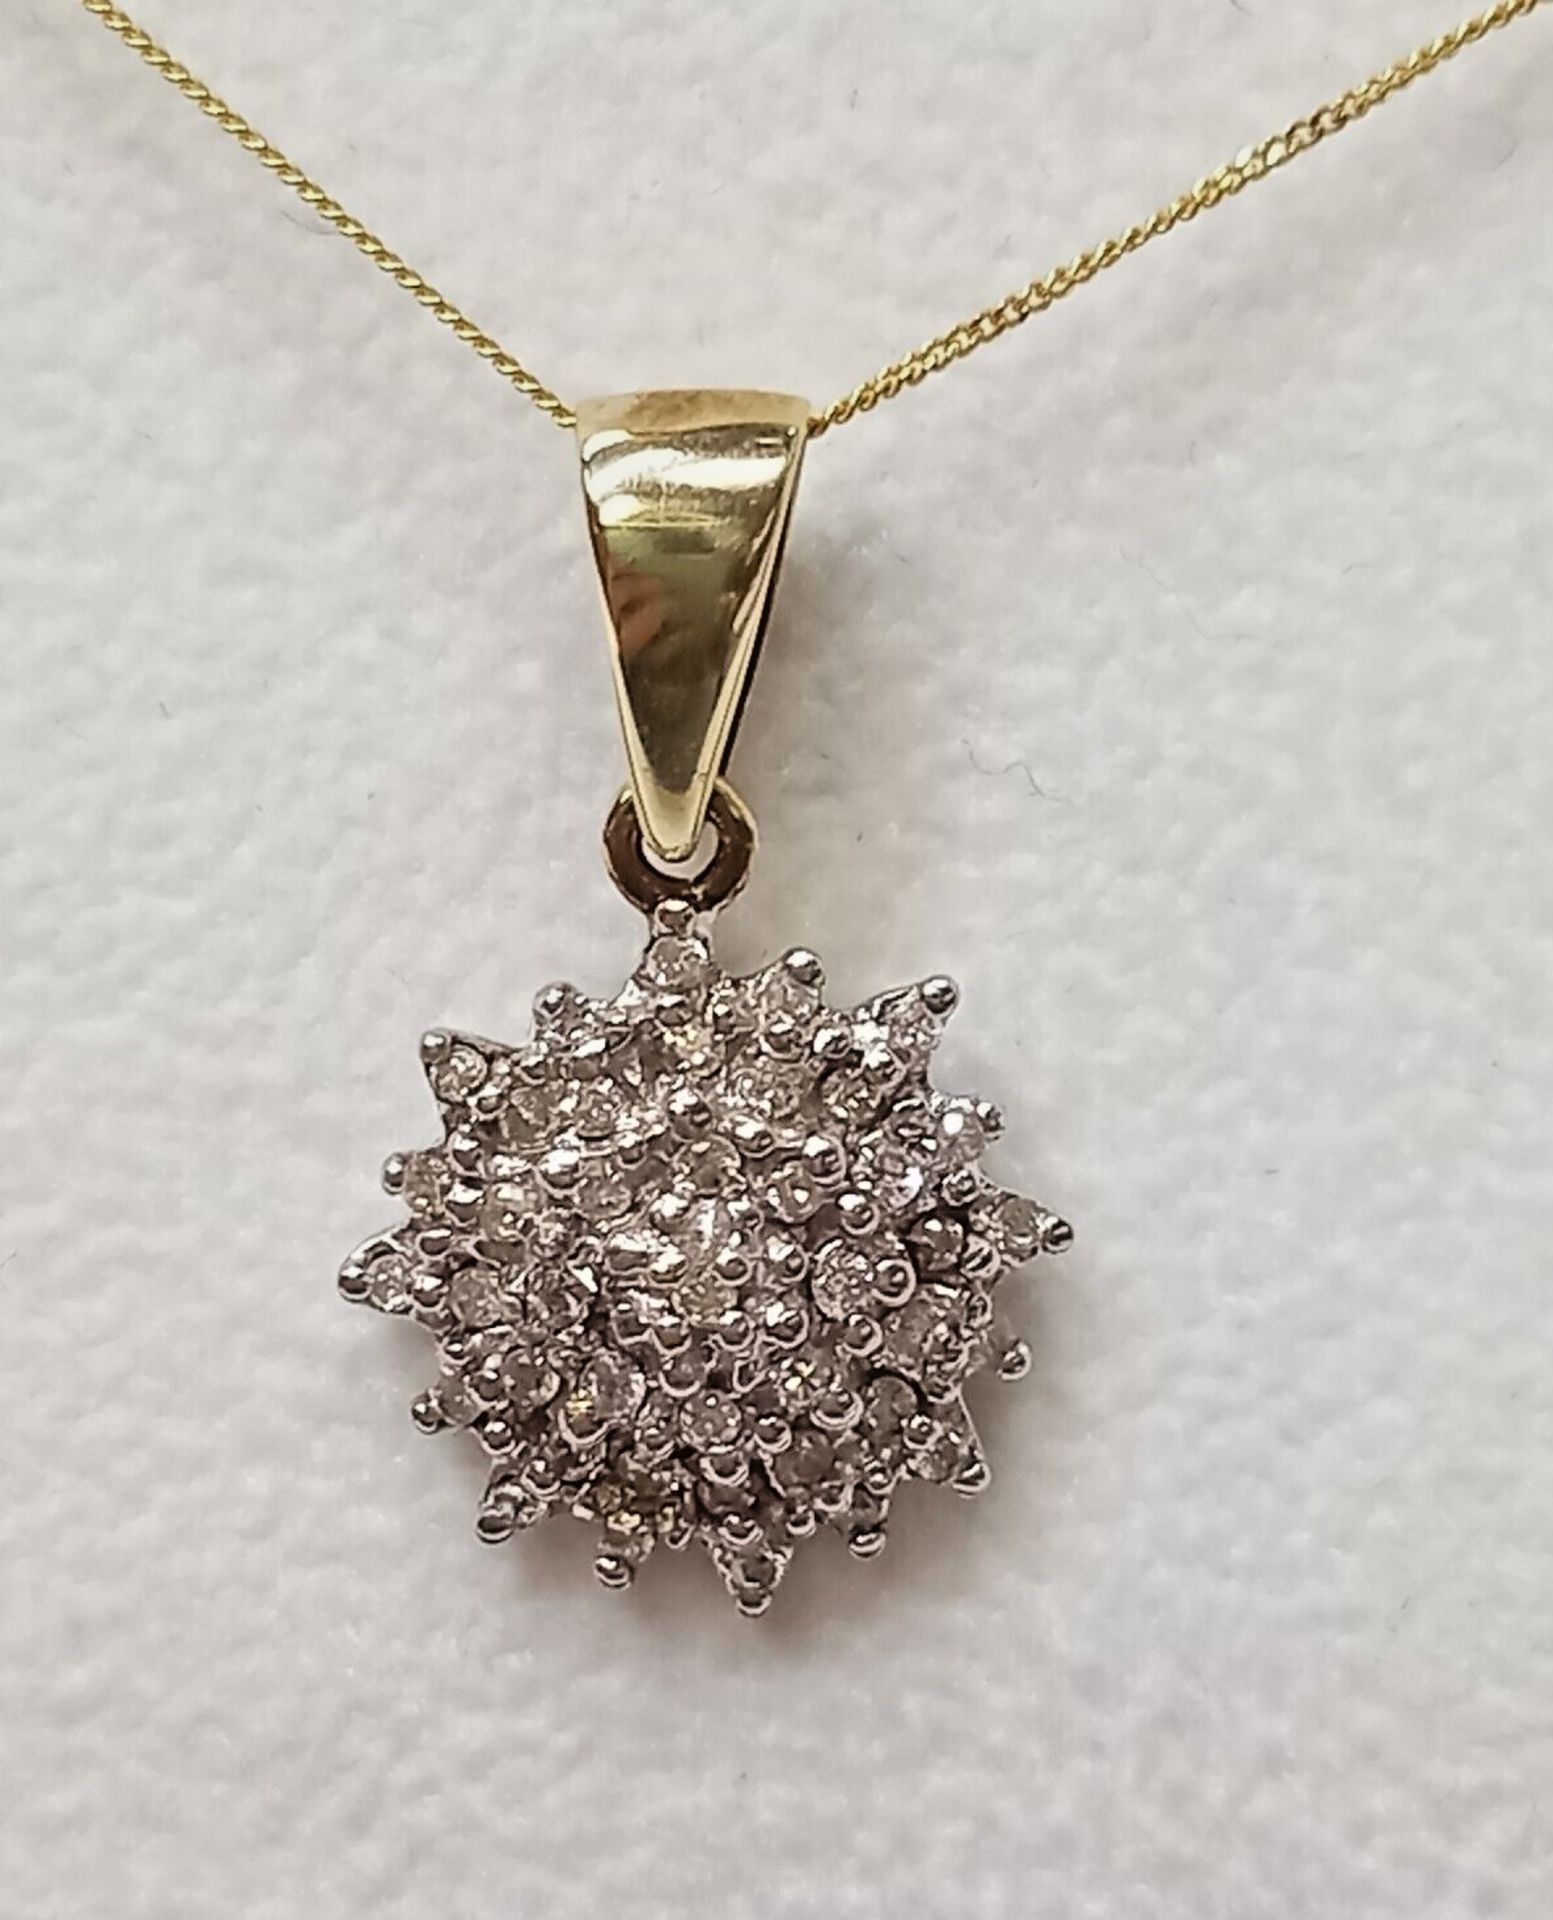 0.35CT CLUSTER DIAMOND PENDANT/9CT YELLOW GOLD IN GIFT BOX WITH VALUATION CERTIFICATE OF £995 - Image 2 of 4